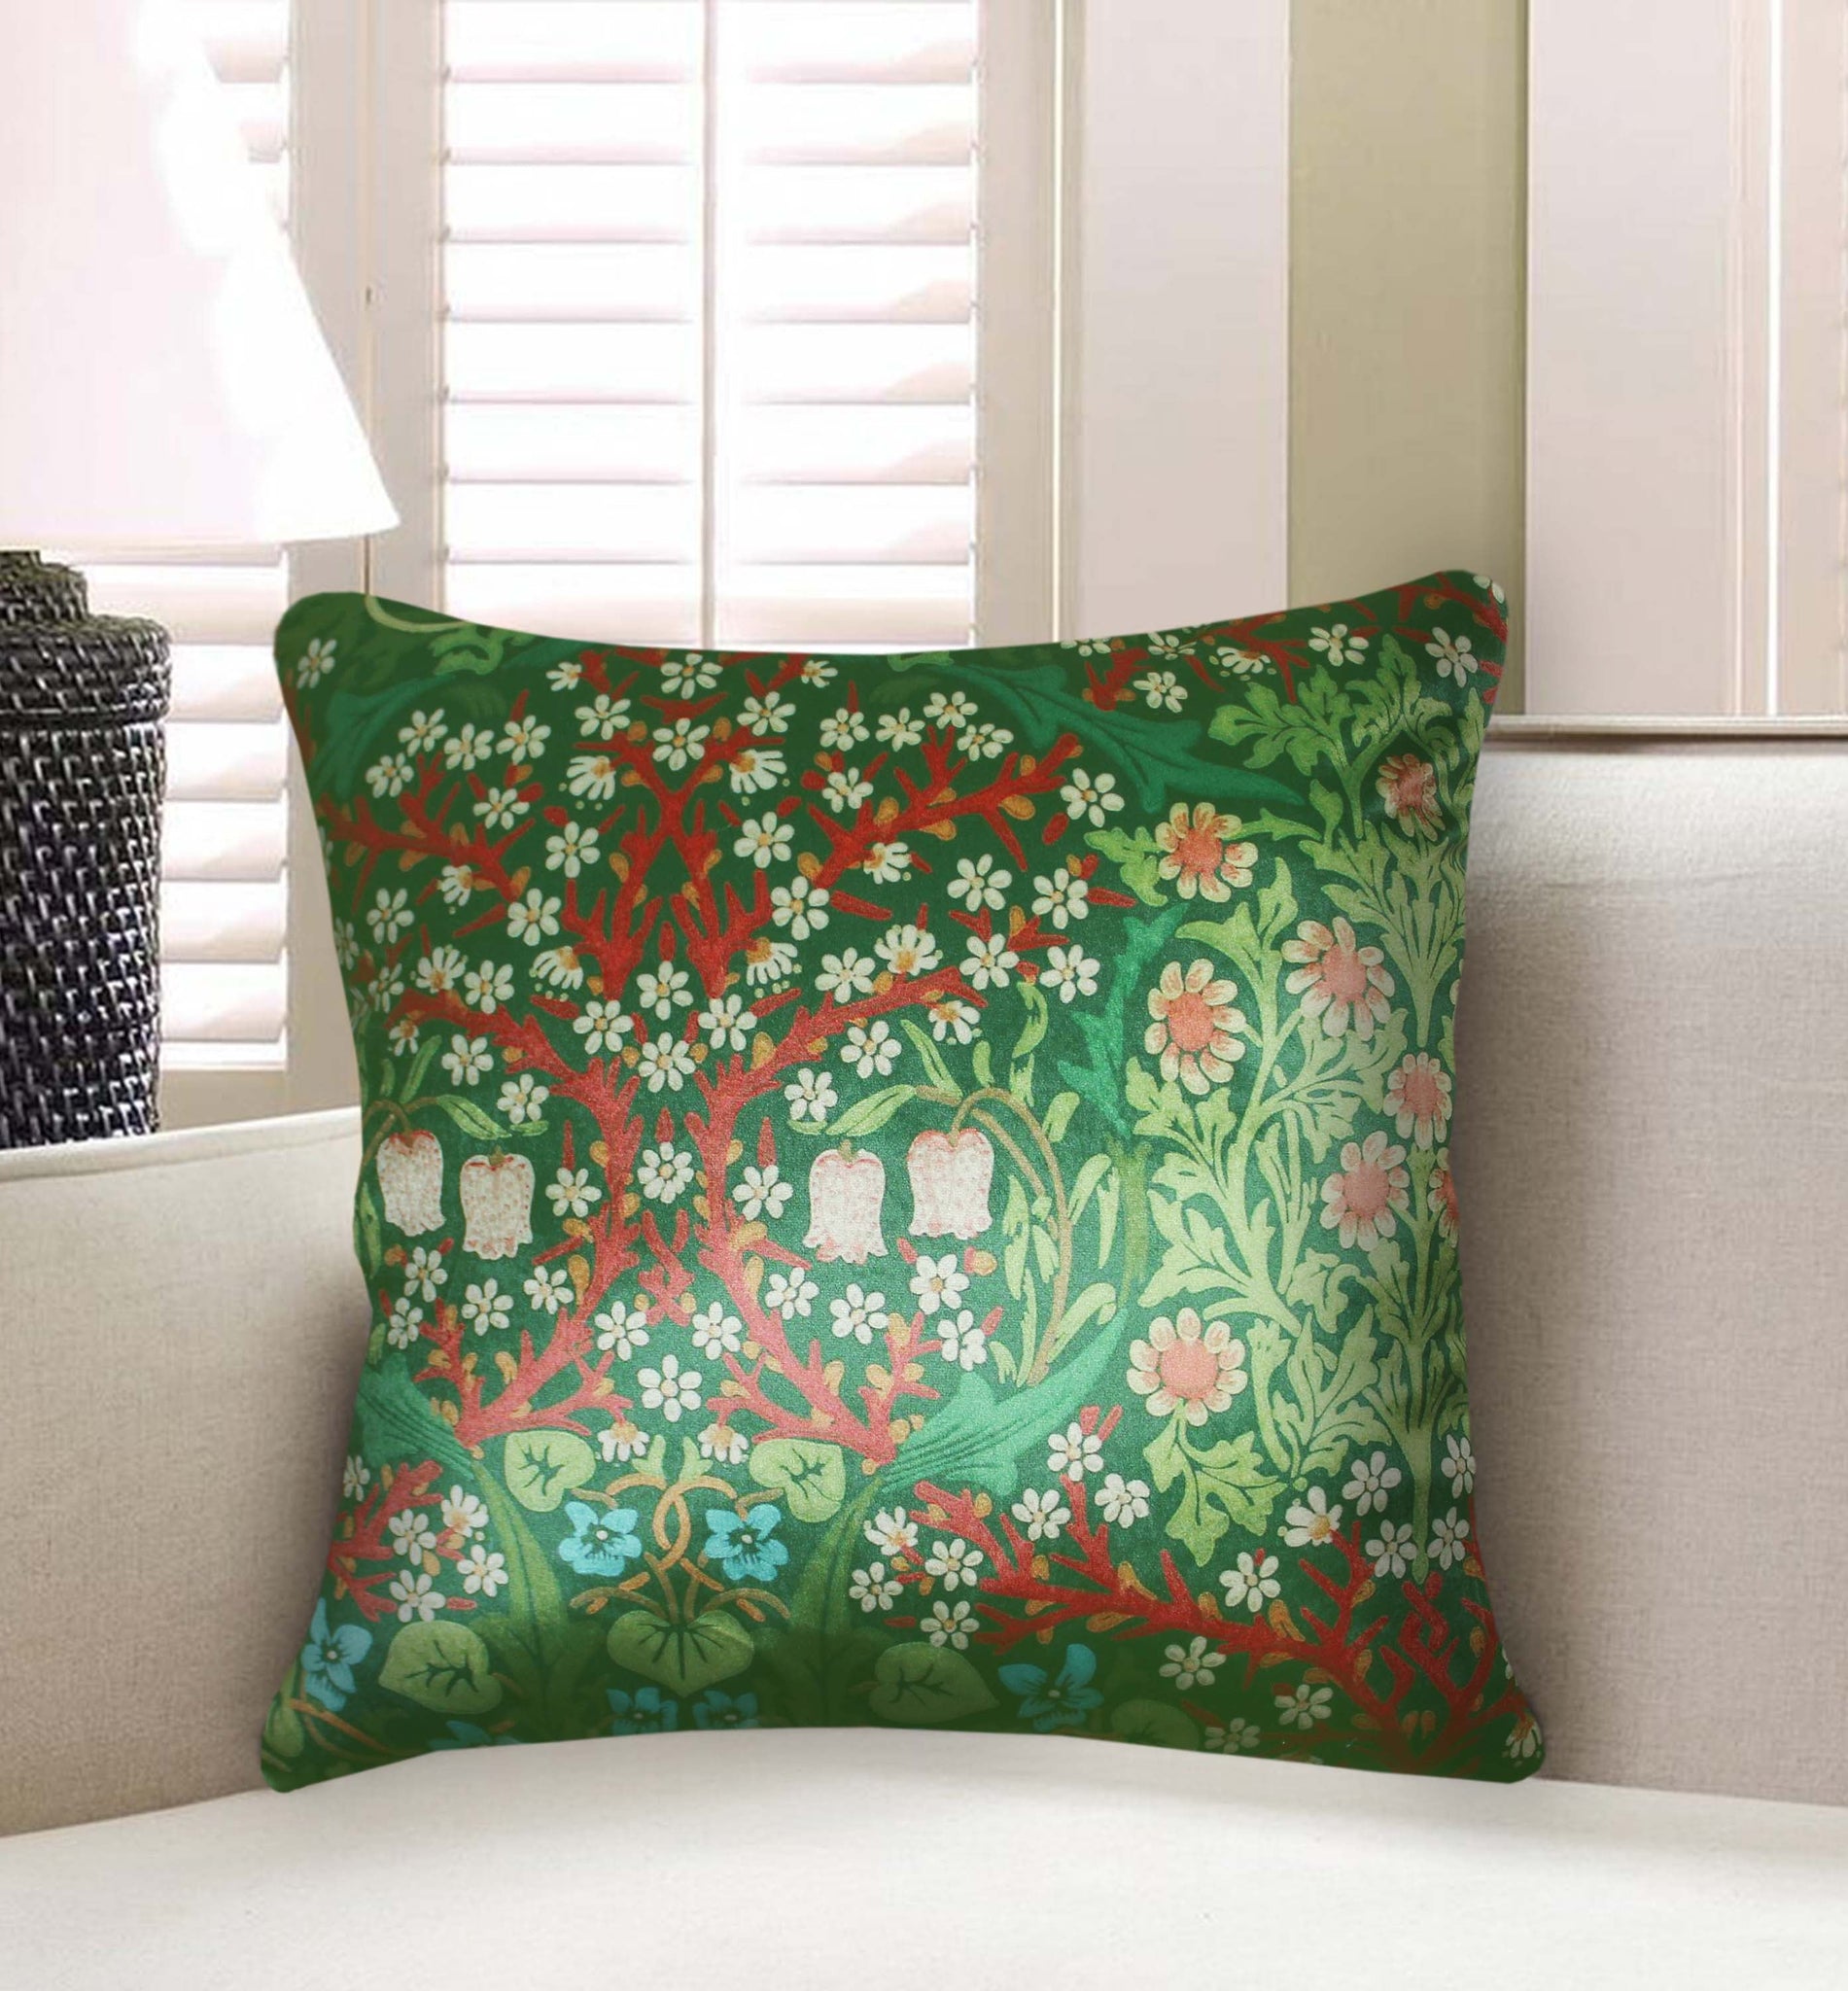 Velvet Cushion Cover Botanic Leaf and Flower Decorative pillowcase Iconic William Morris Floral Décor Throw Pillow for Sofa Chair Bedroom Living Room Multi Color 45x45cm (18x18 Inches)